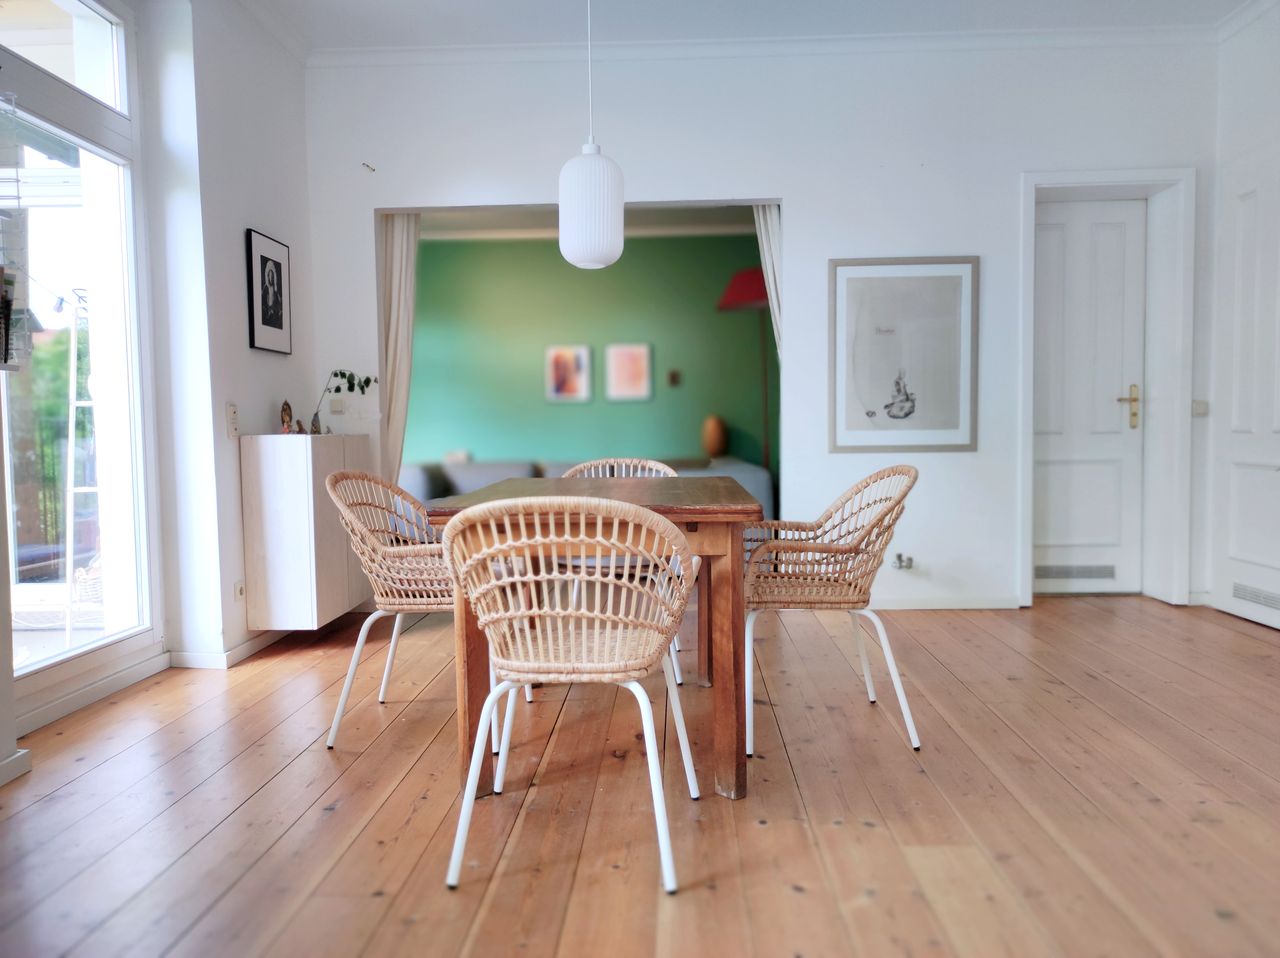 Great apartment in one of the most beautiful streets of Berlin near Mauerpark